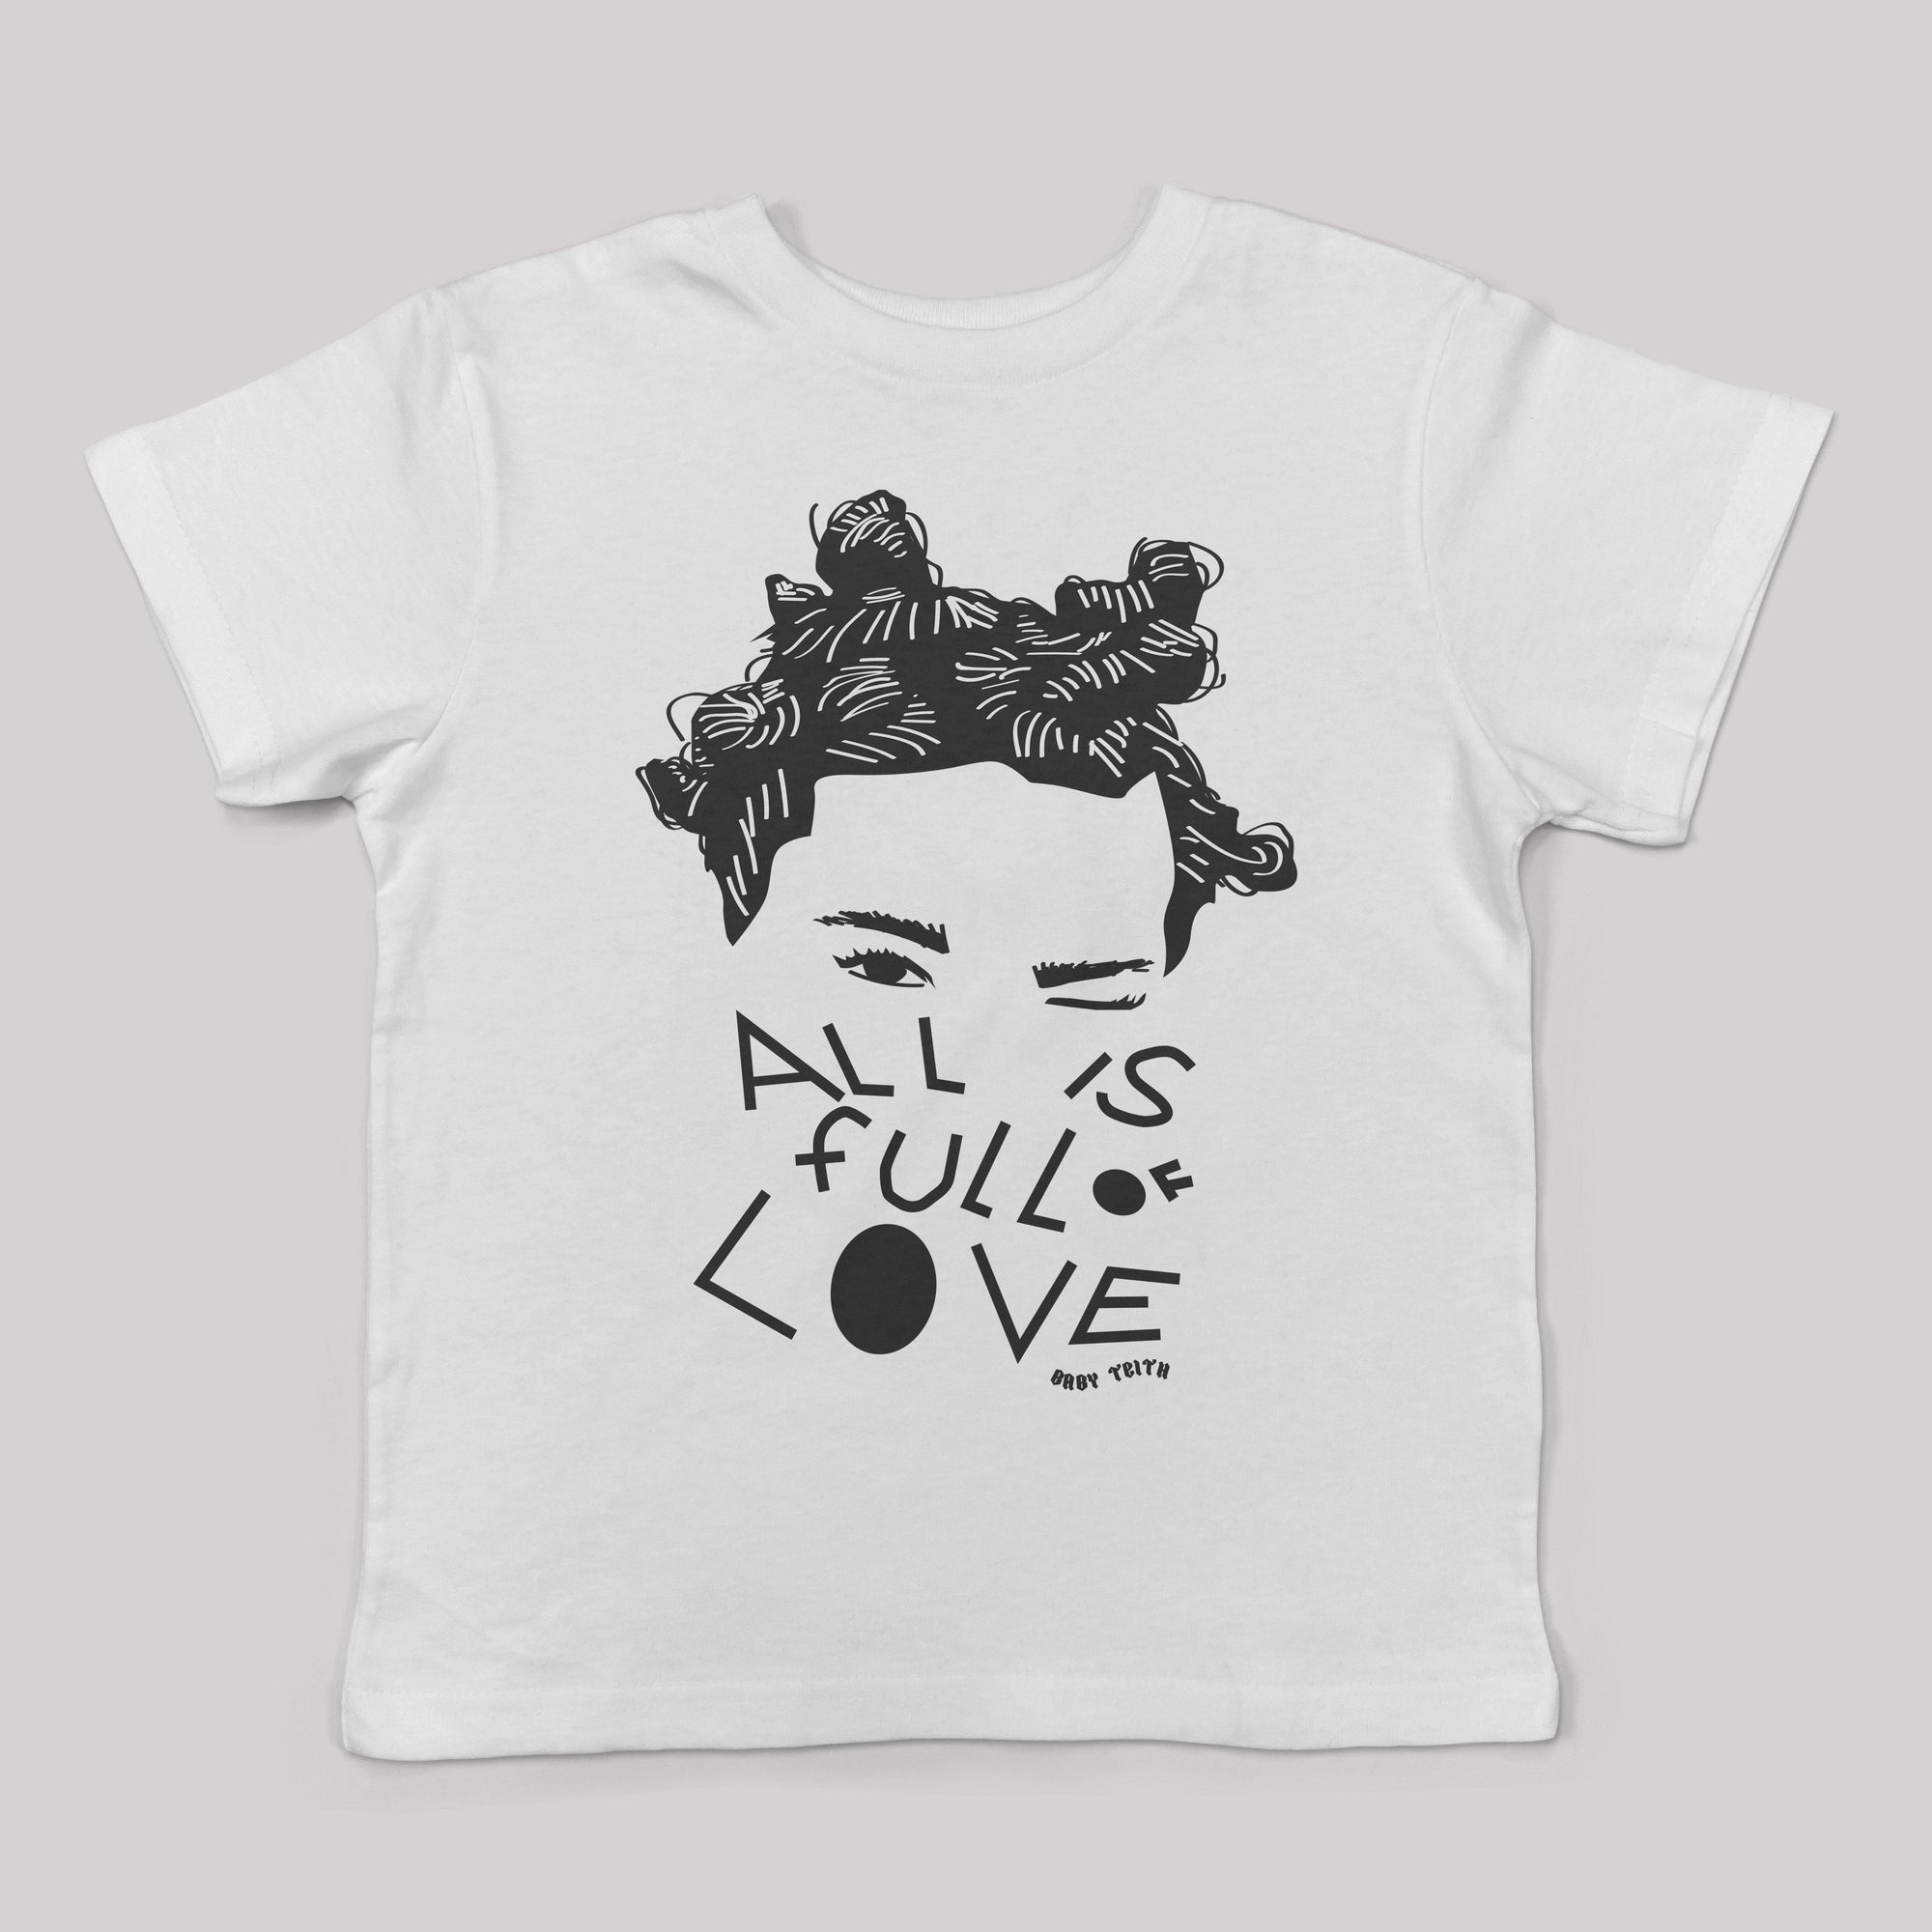 "All is Full of Love" Kid's Tee - Baby Teith